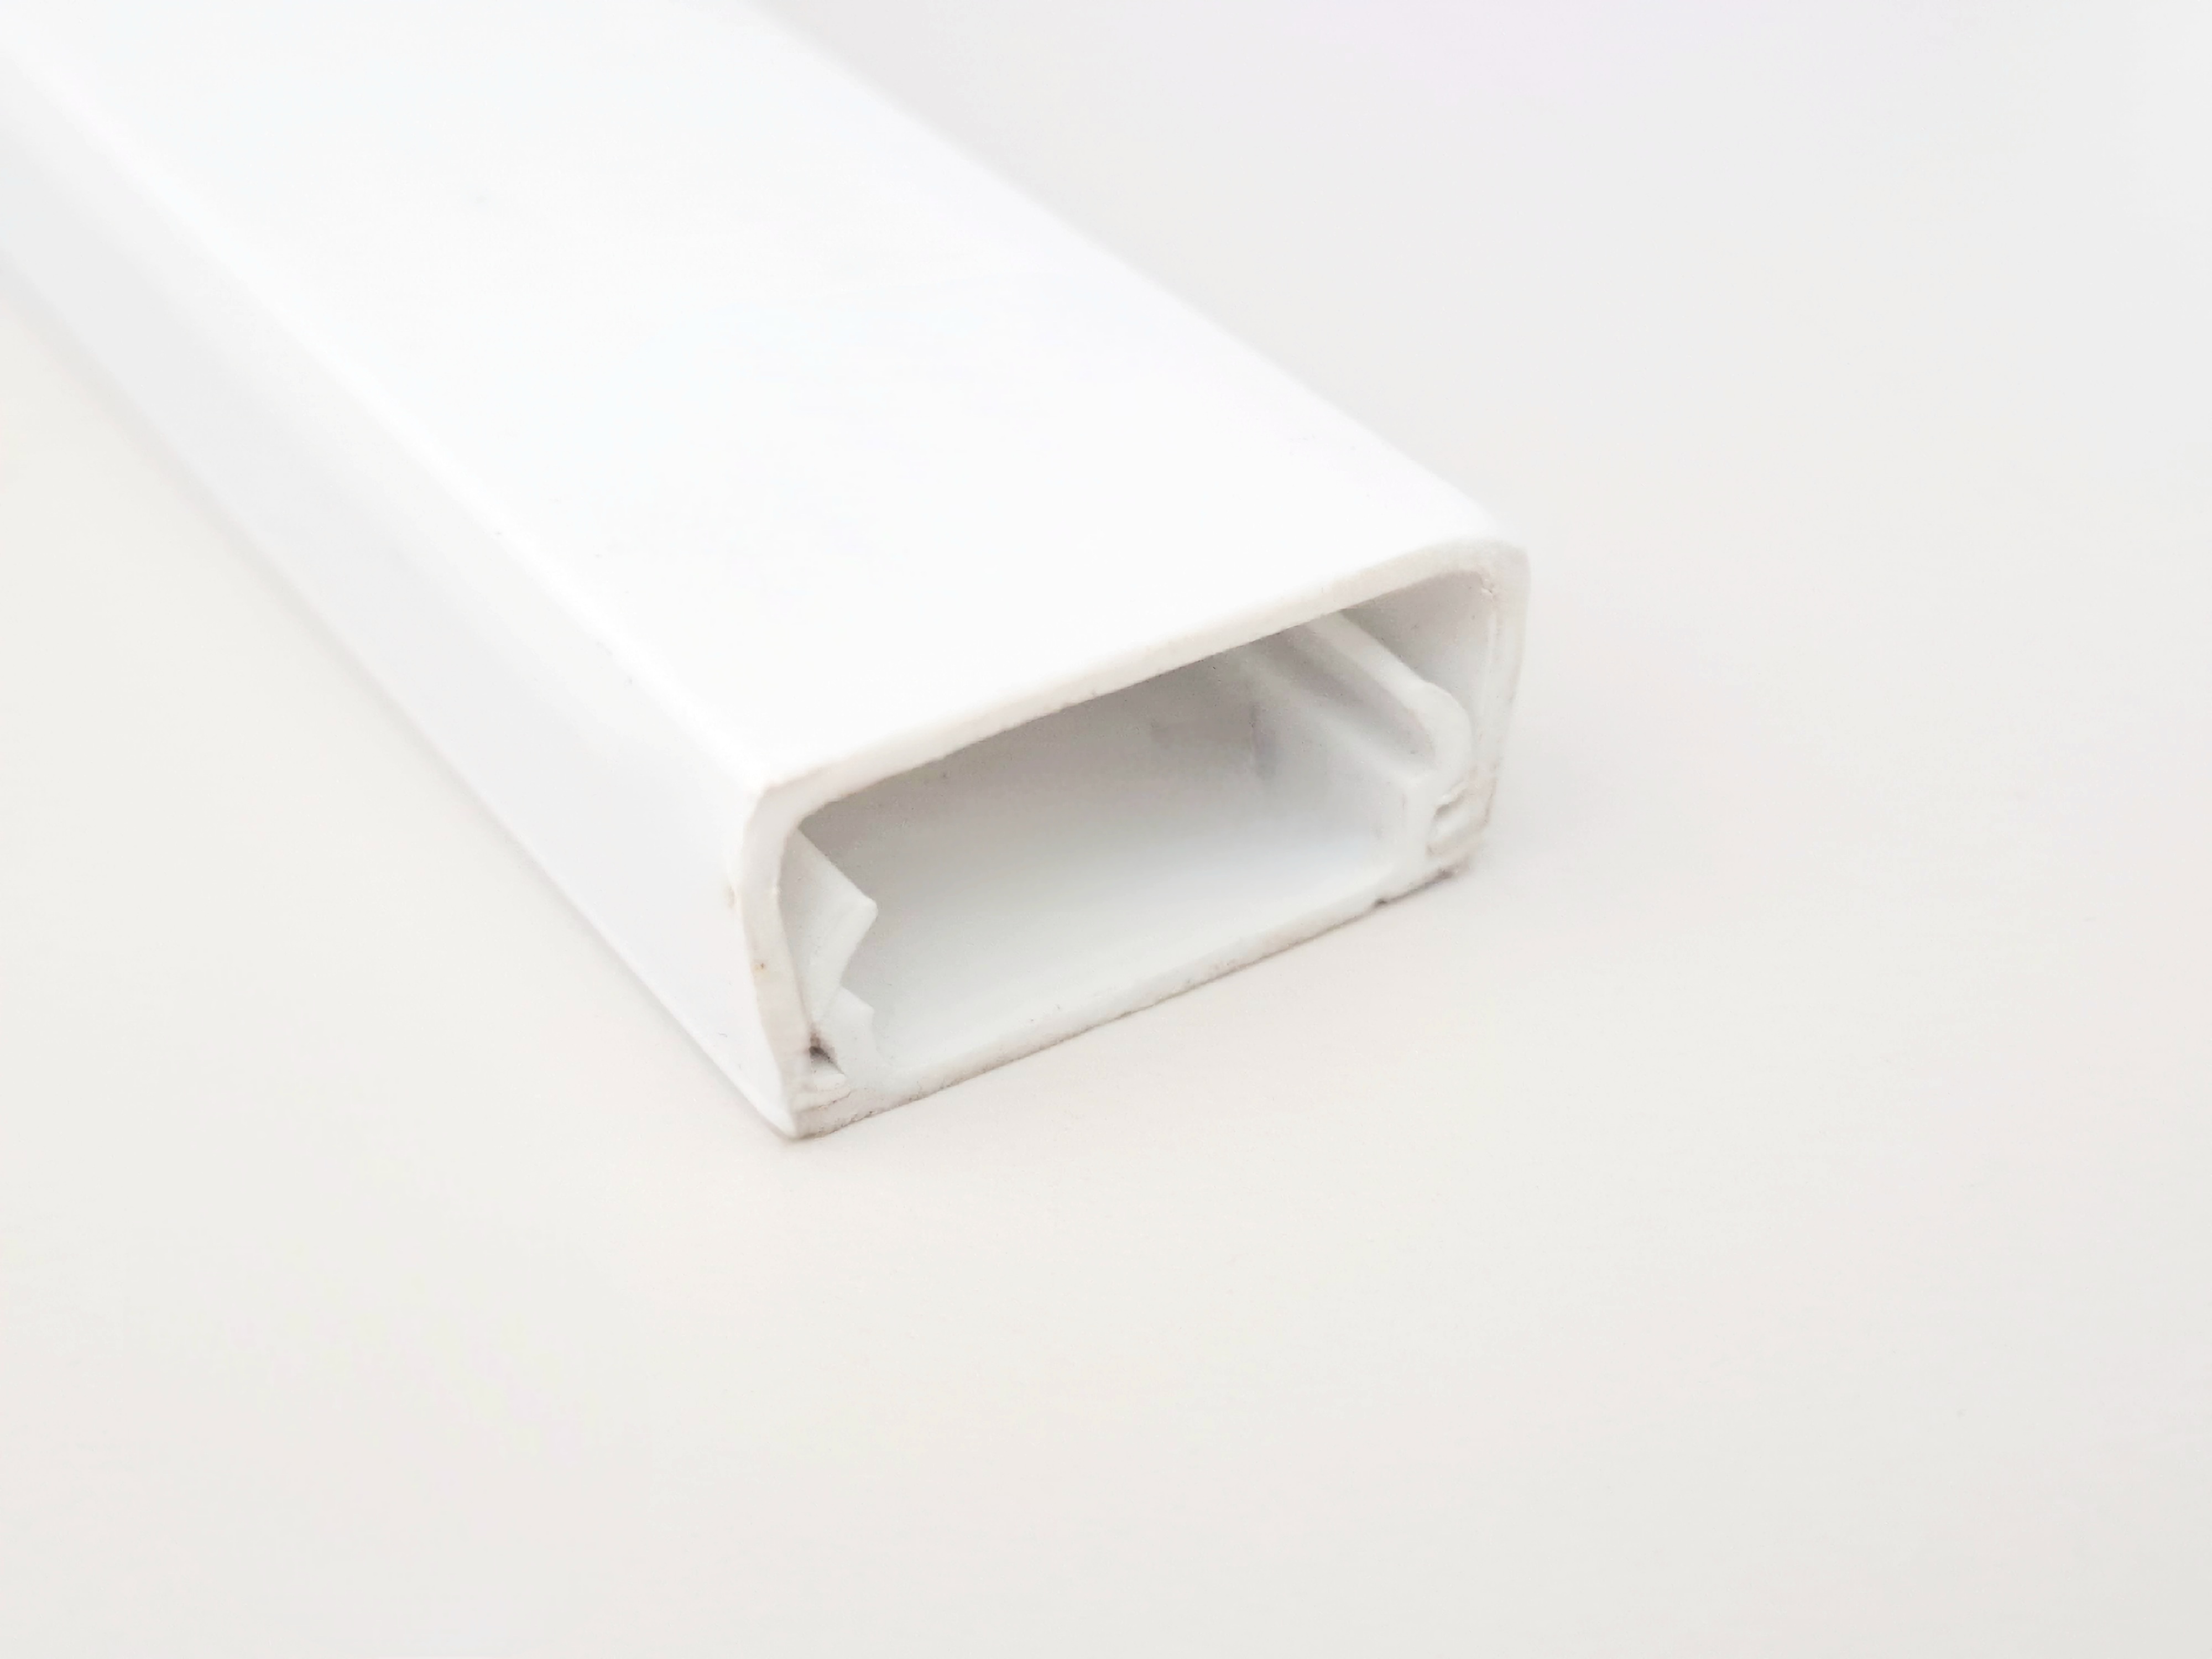 Cable Trunking 3/4” x 6ft (LxWxH: 1800mm x 20mm x 10mm) 